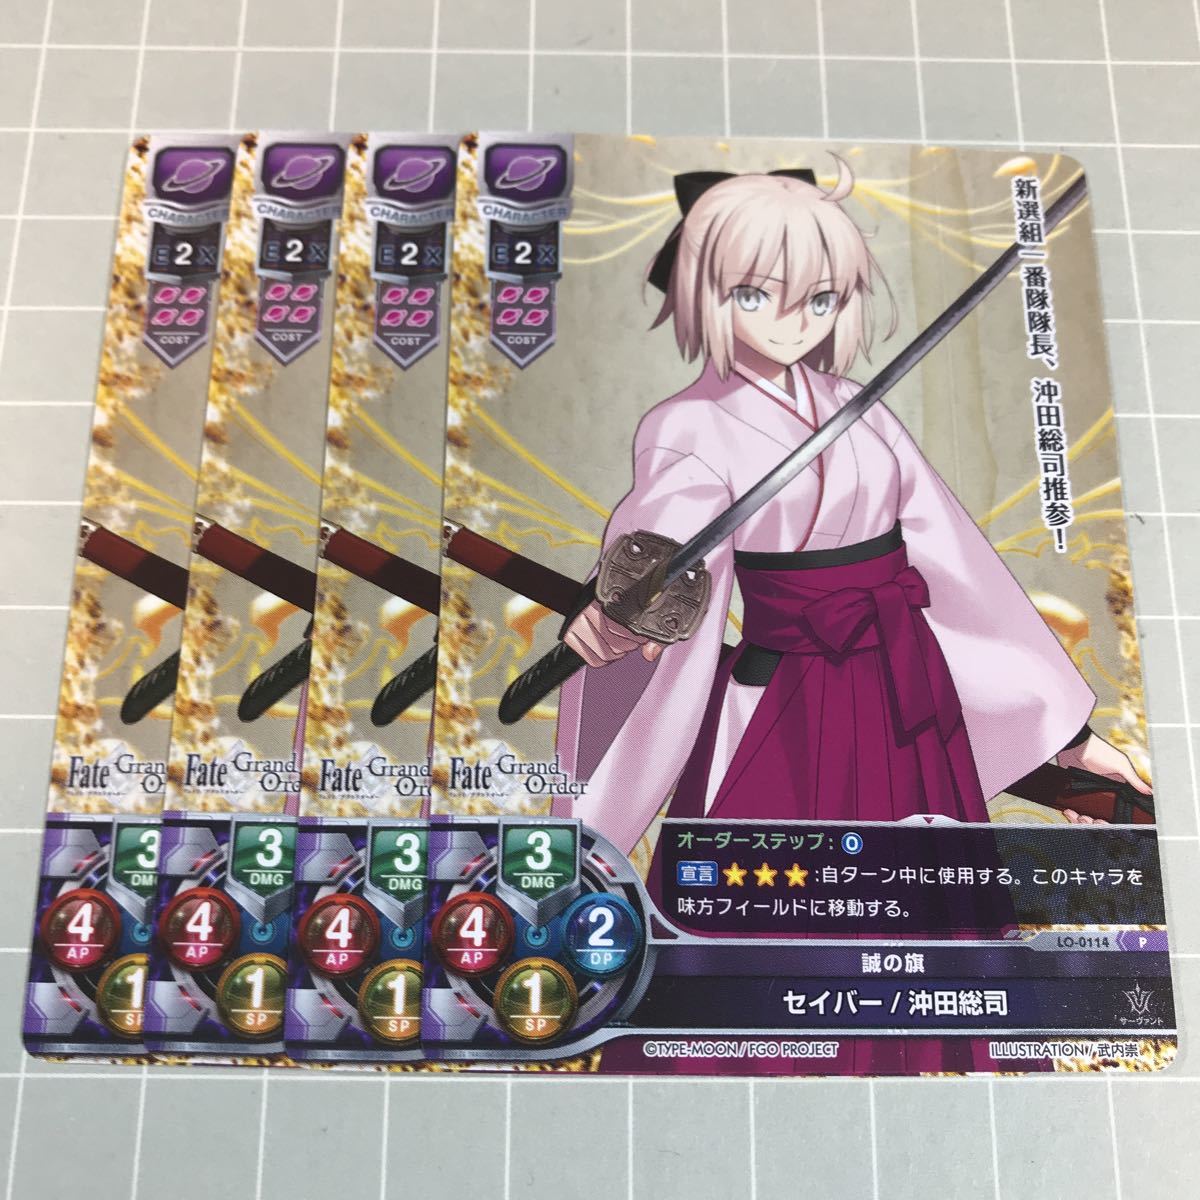  prompt decision including carriage Lycee lycee over chua limitation promo FGO.. flag Saber /. rice field total .4 pieces set stock 2